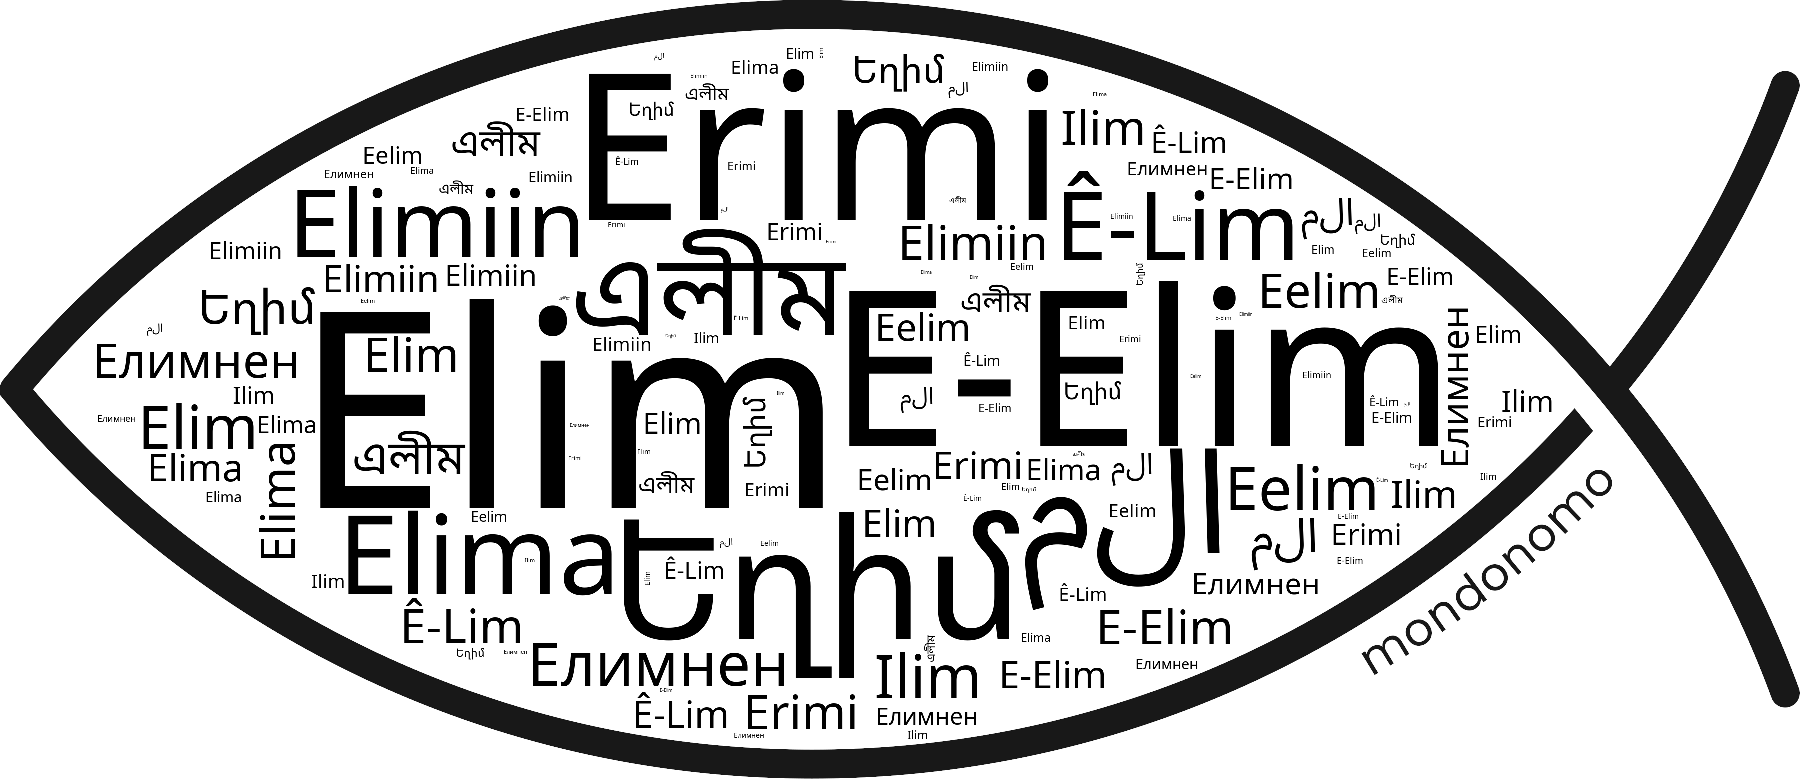 Name Elim in the world's Bibles